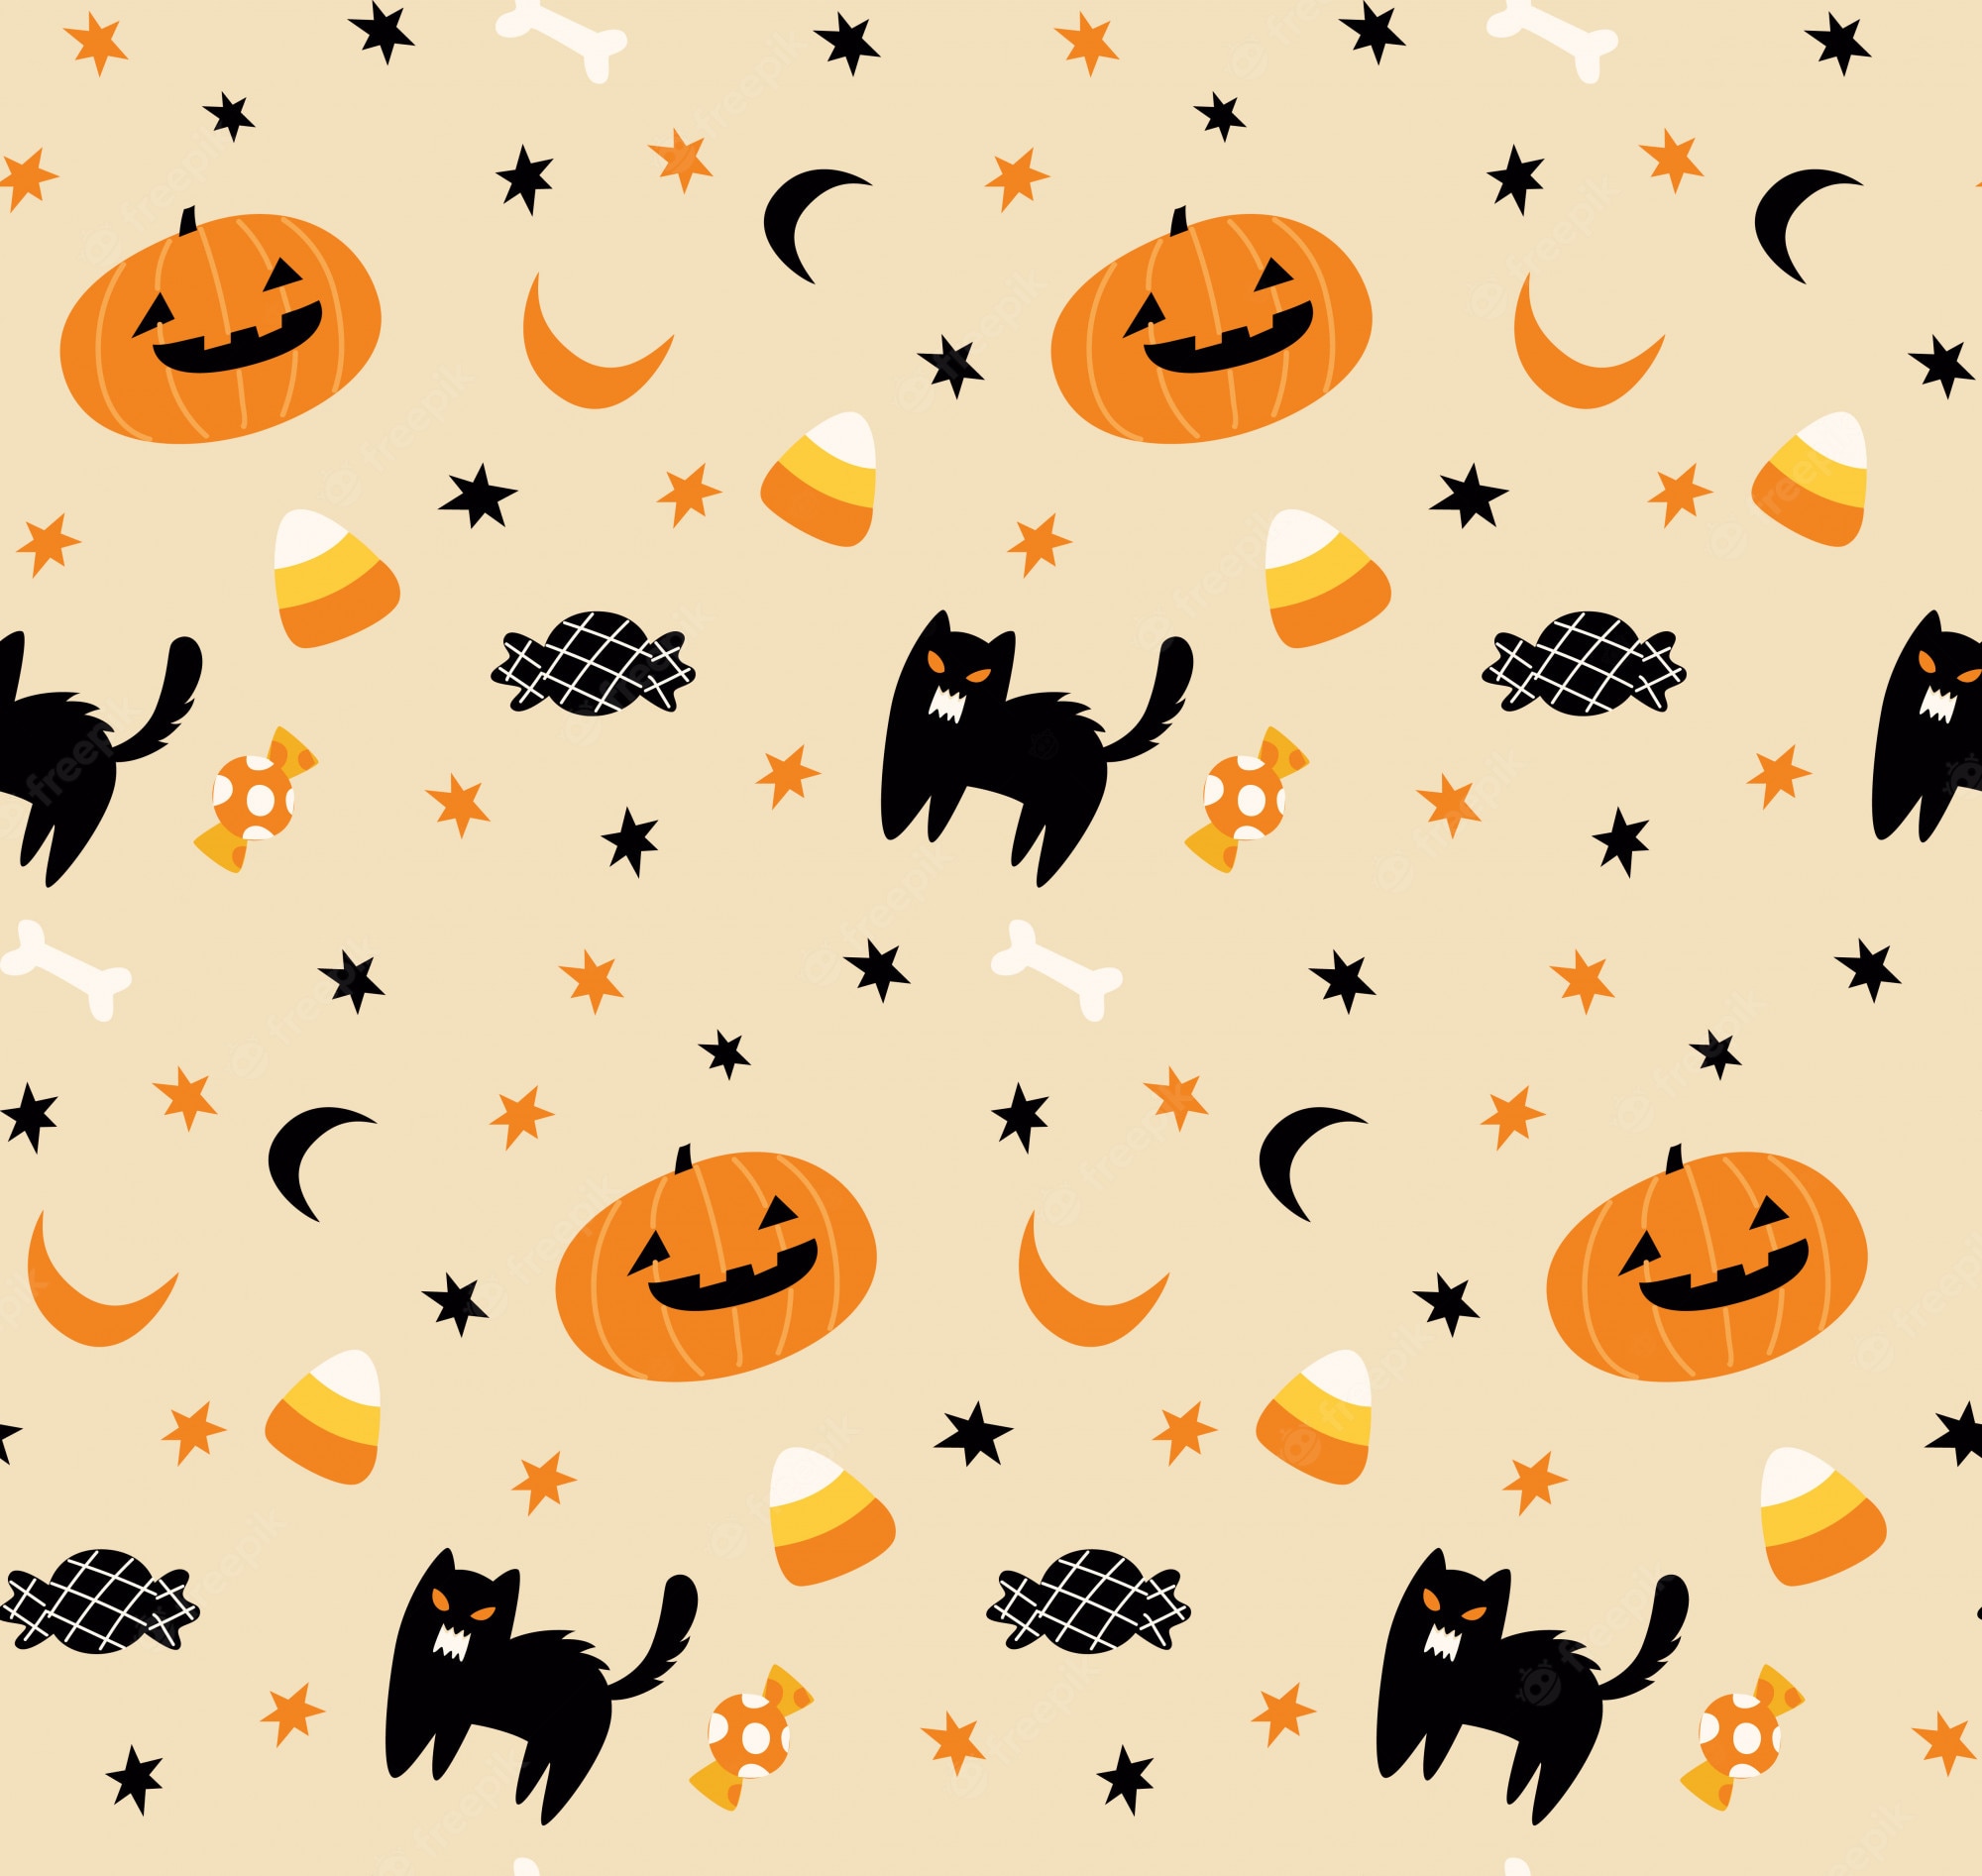 Details more than 90 halloween wallpapers preppy - in.coedo.com.vn